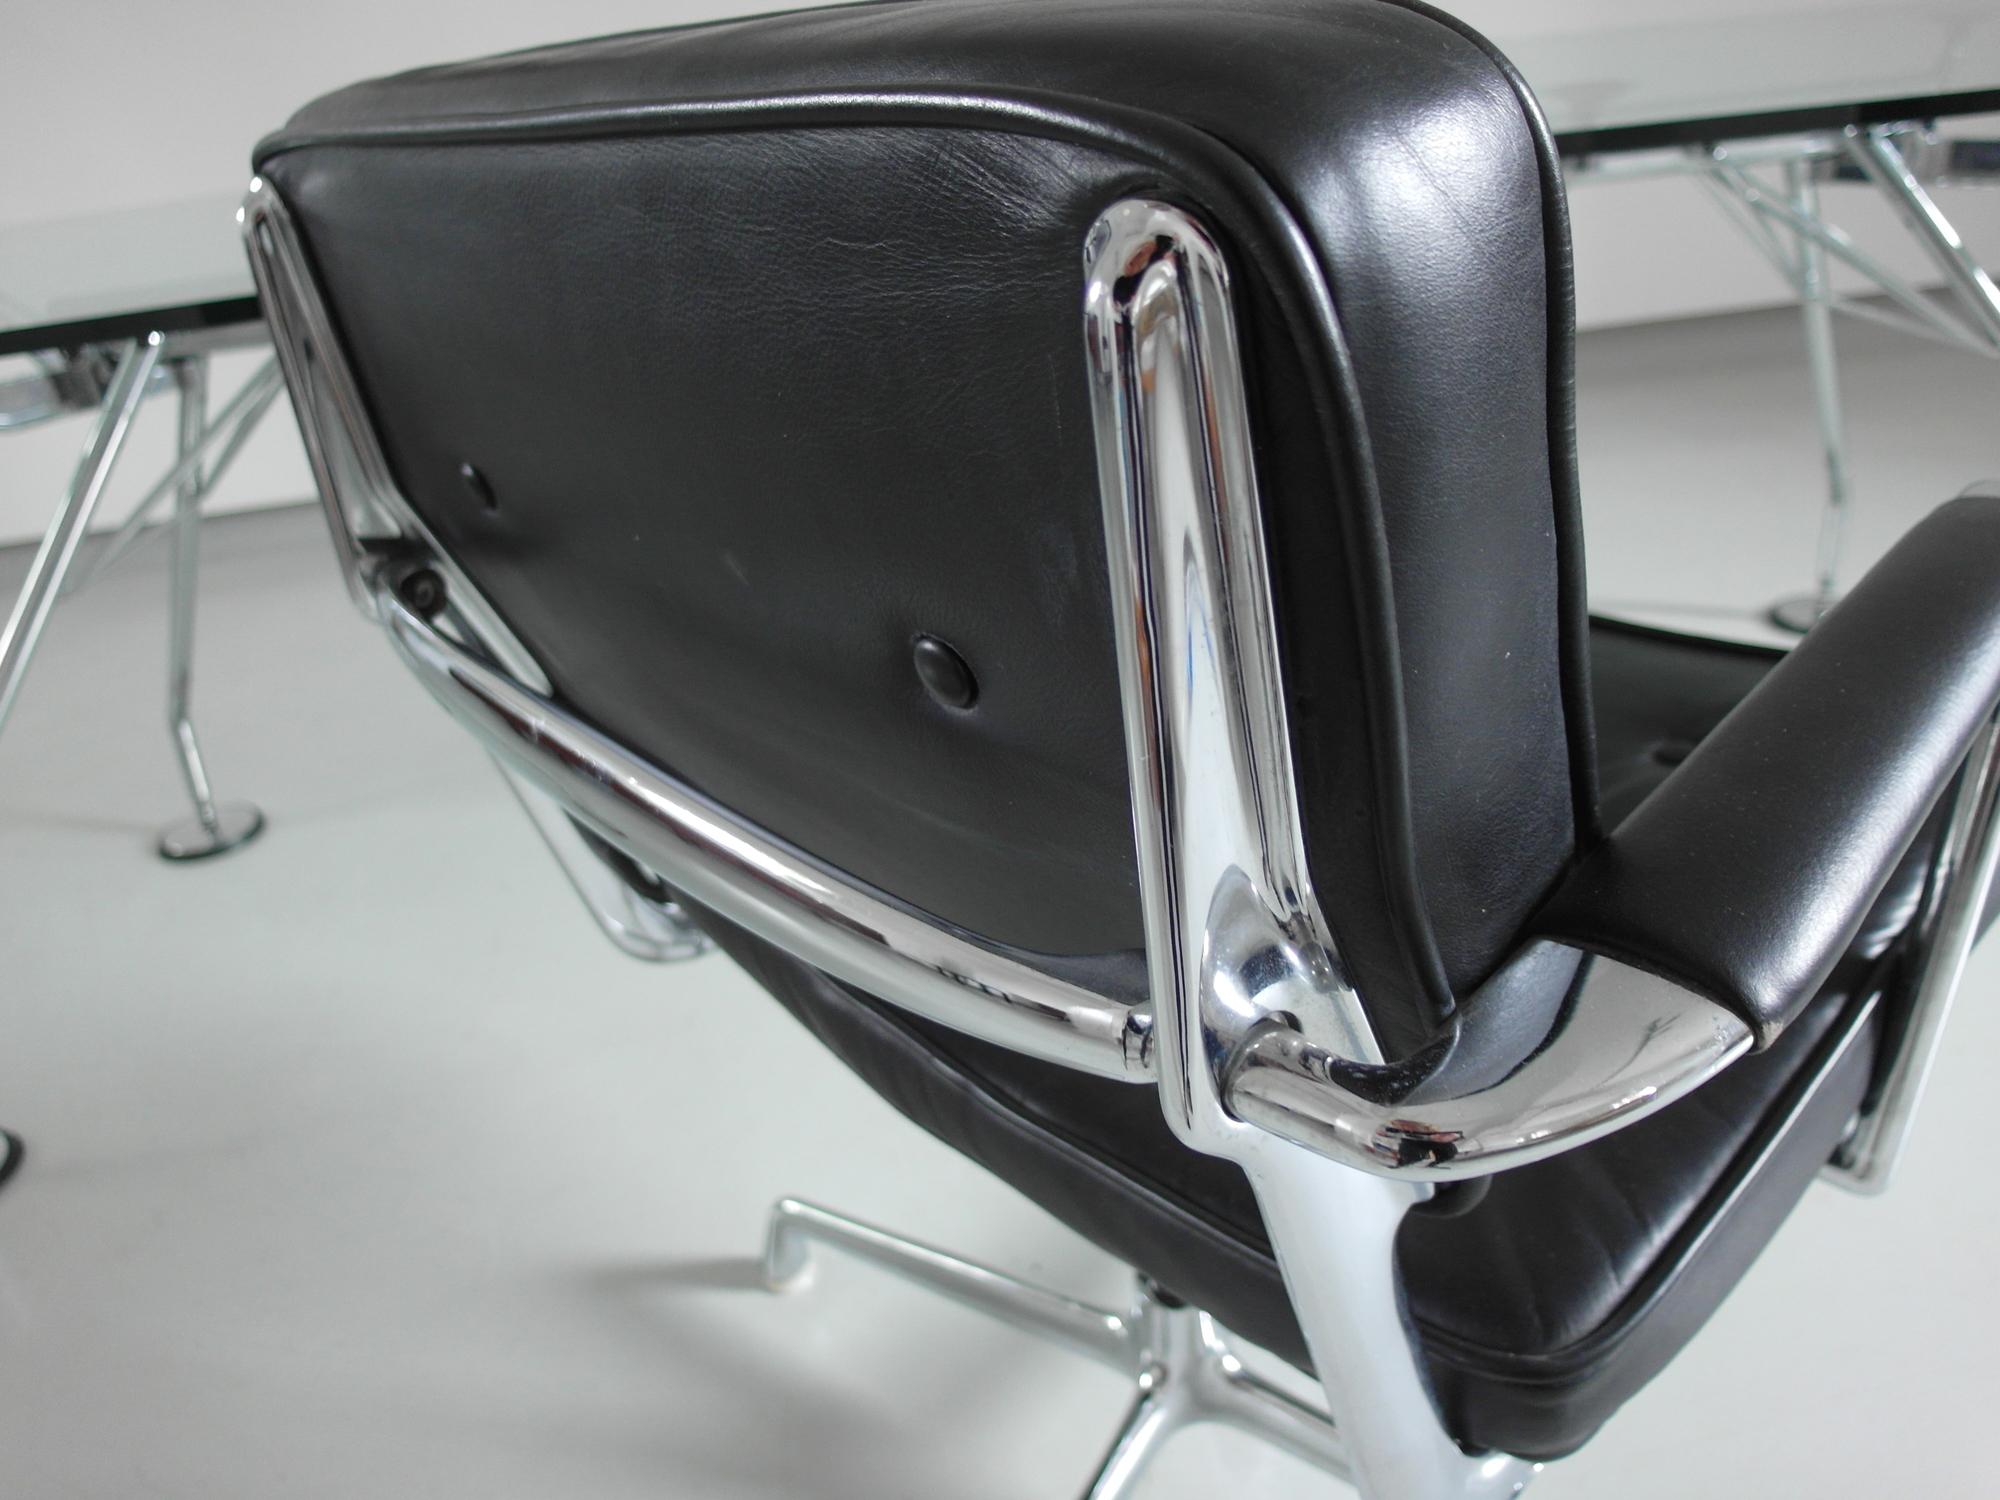 Aluminum Eames Intermediate chair, early Fehlbaum production for Herman Miller, 1968-1973